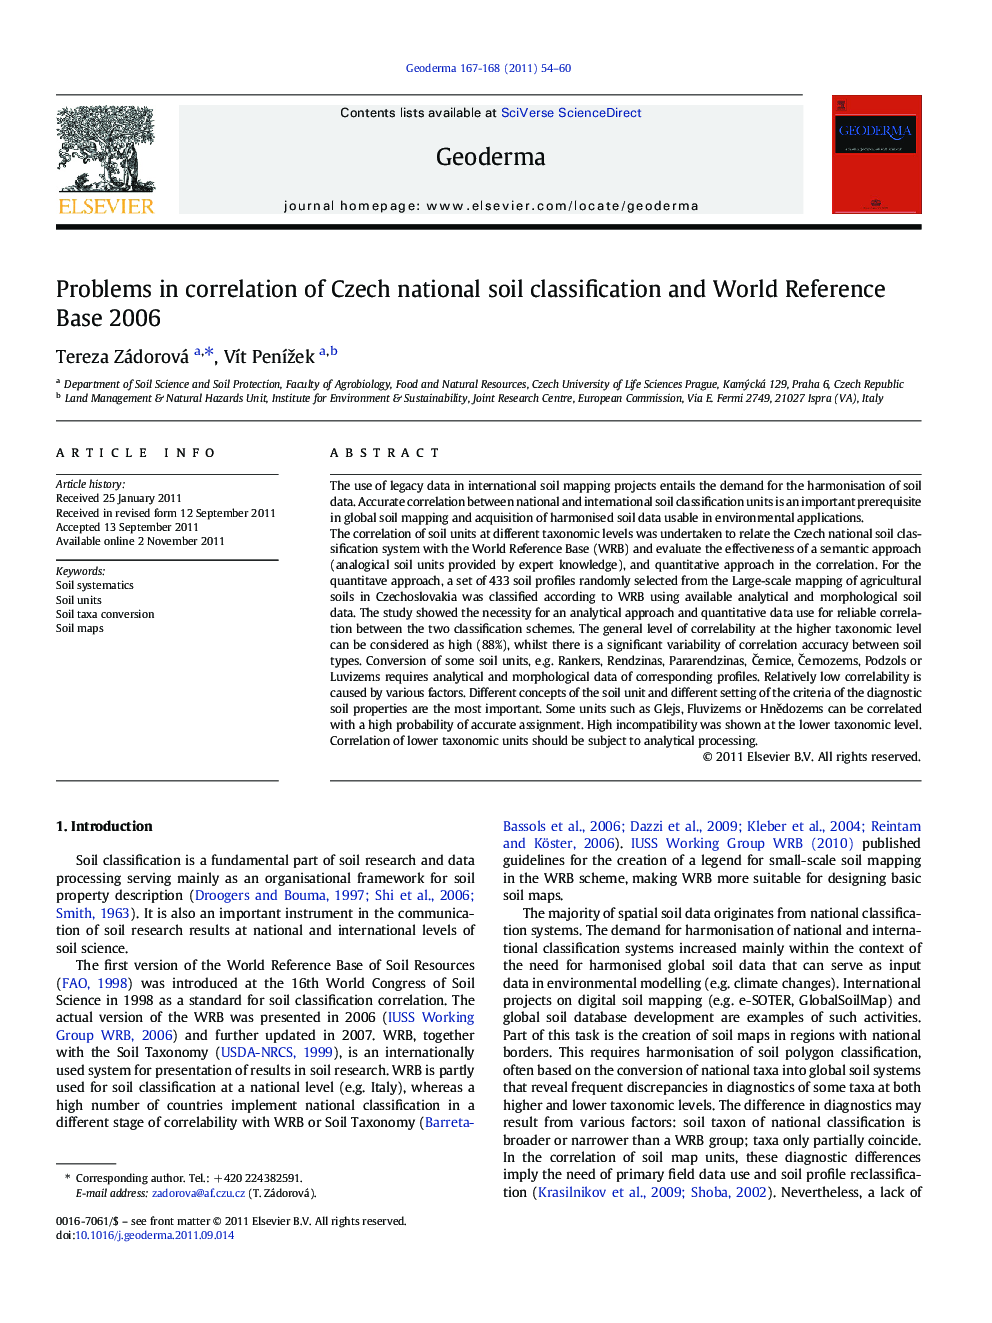 Problems in correlation of Czech national soil classification and World Reference Base 2006